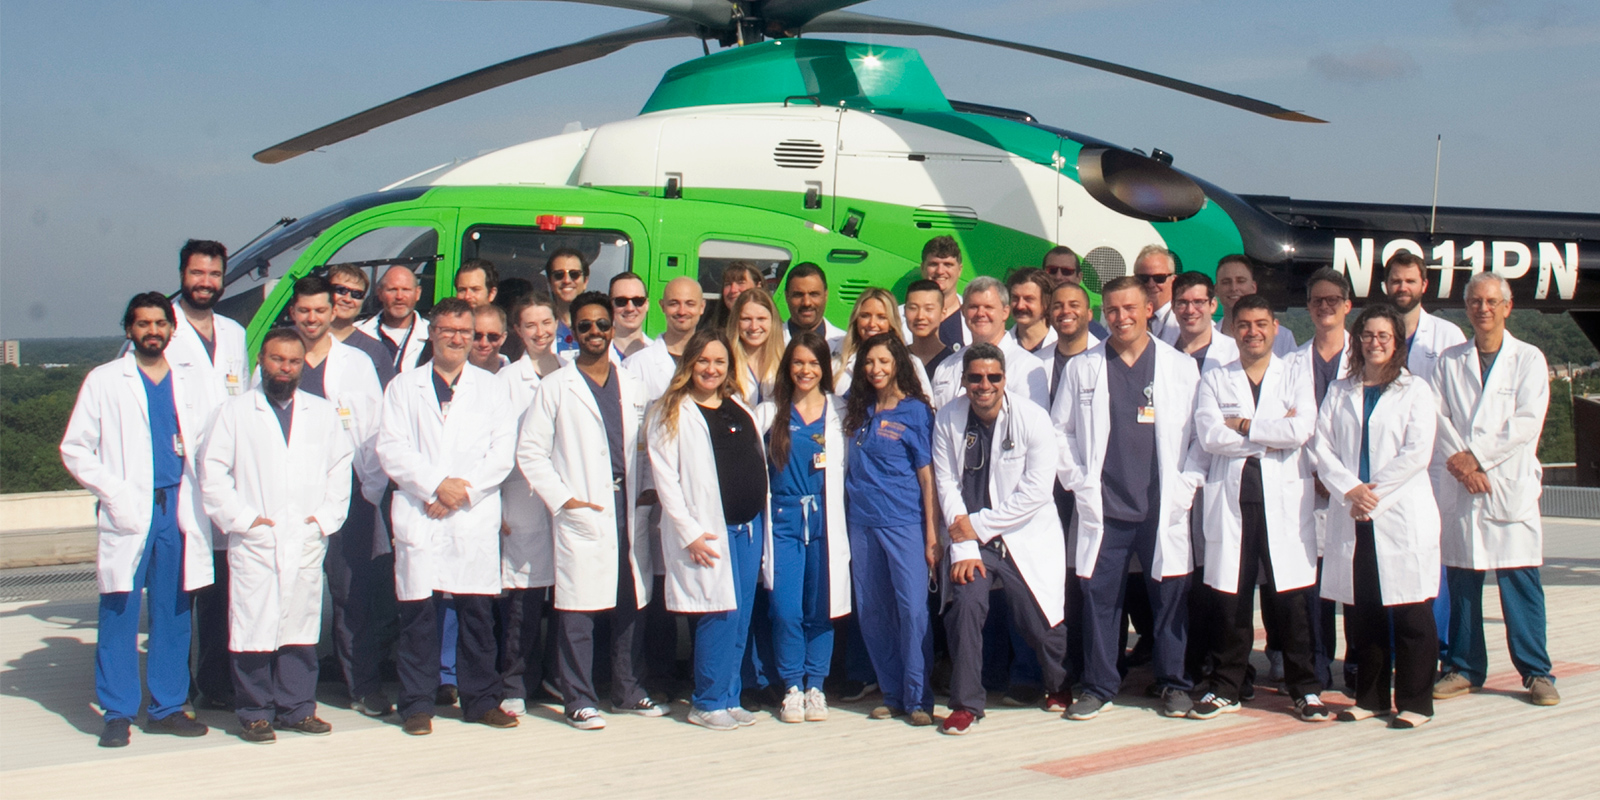 Our Faculty and Residents